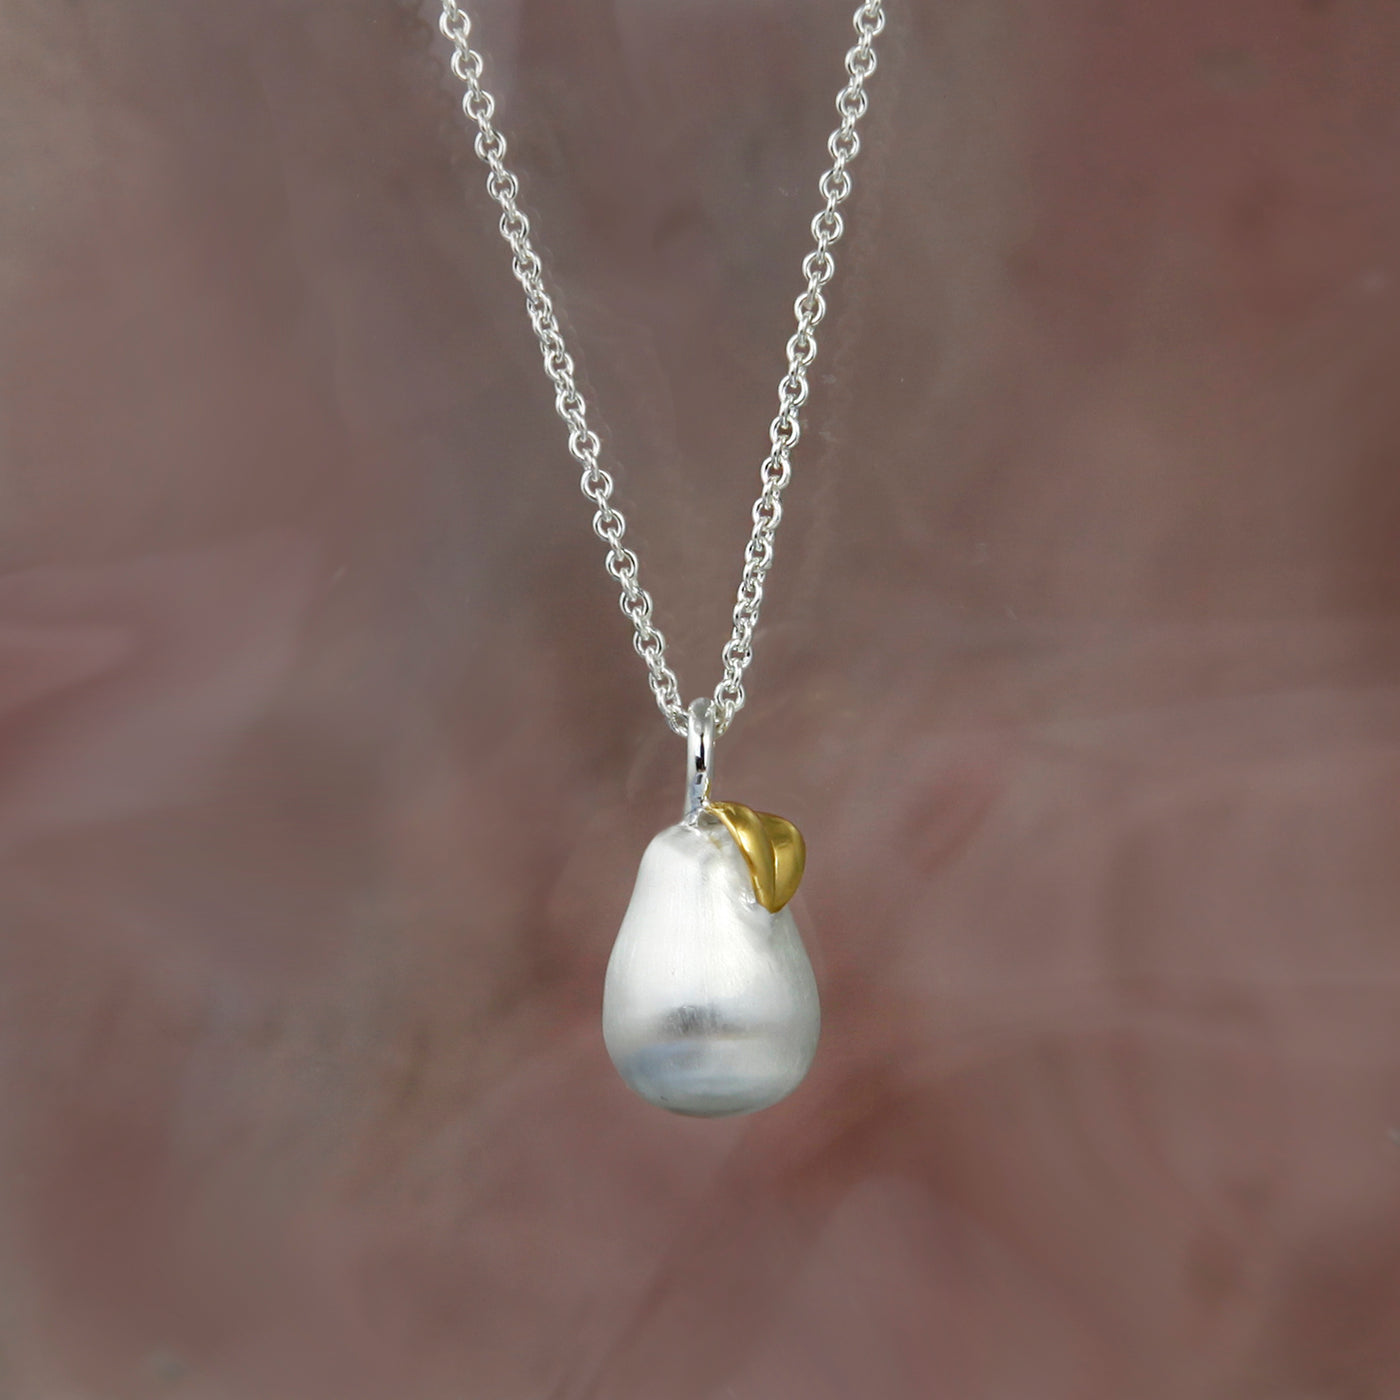 SIlver Pear Pendant with a Gold Leaf 